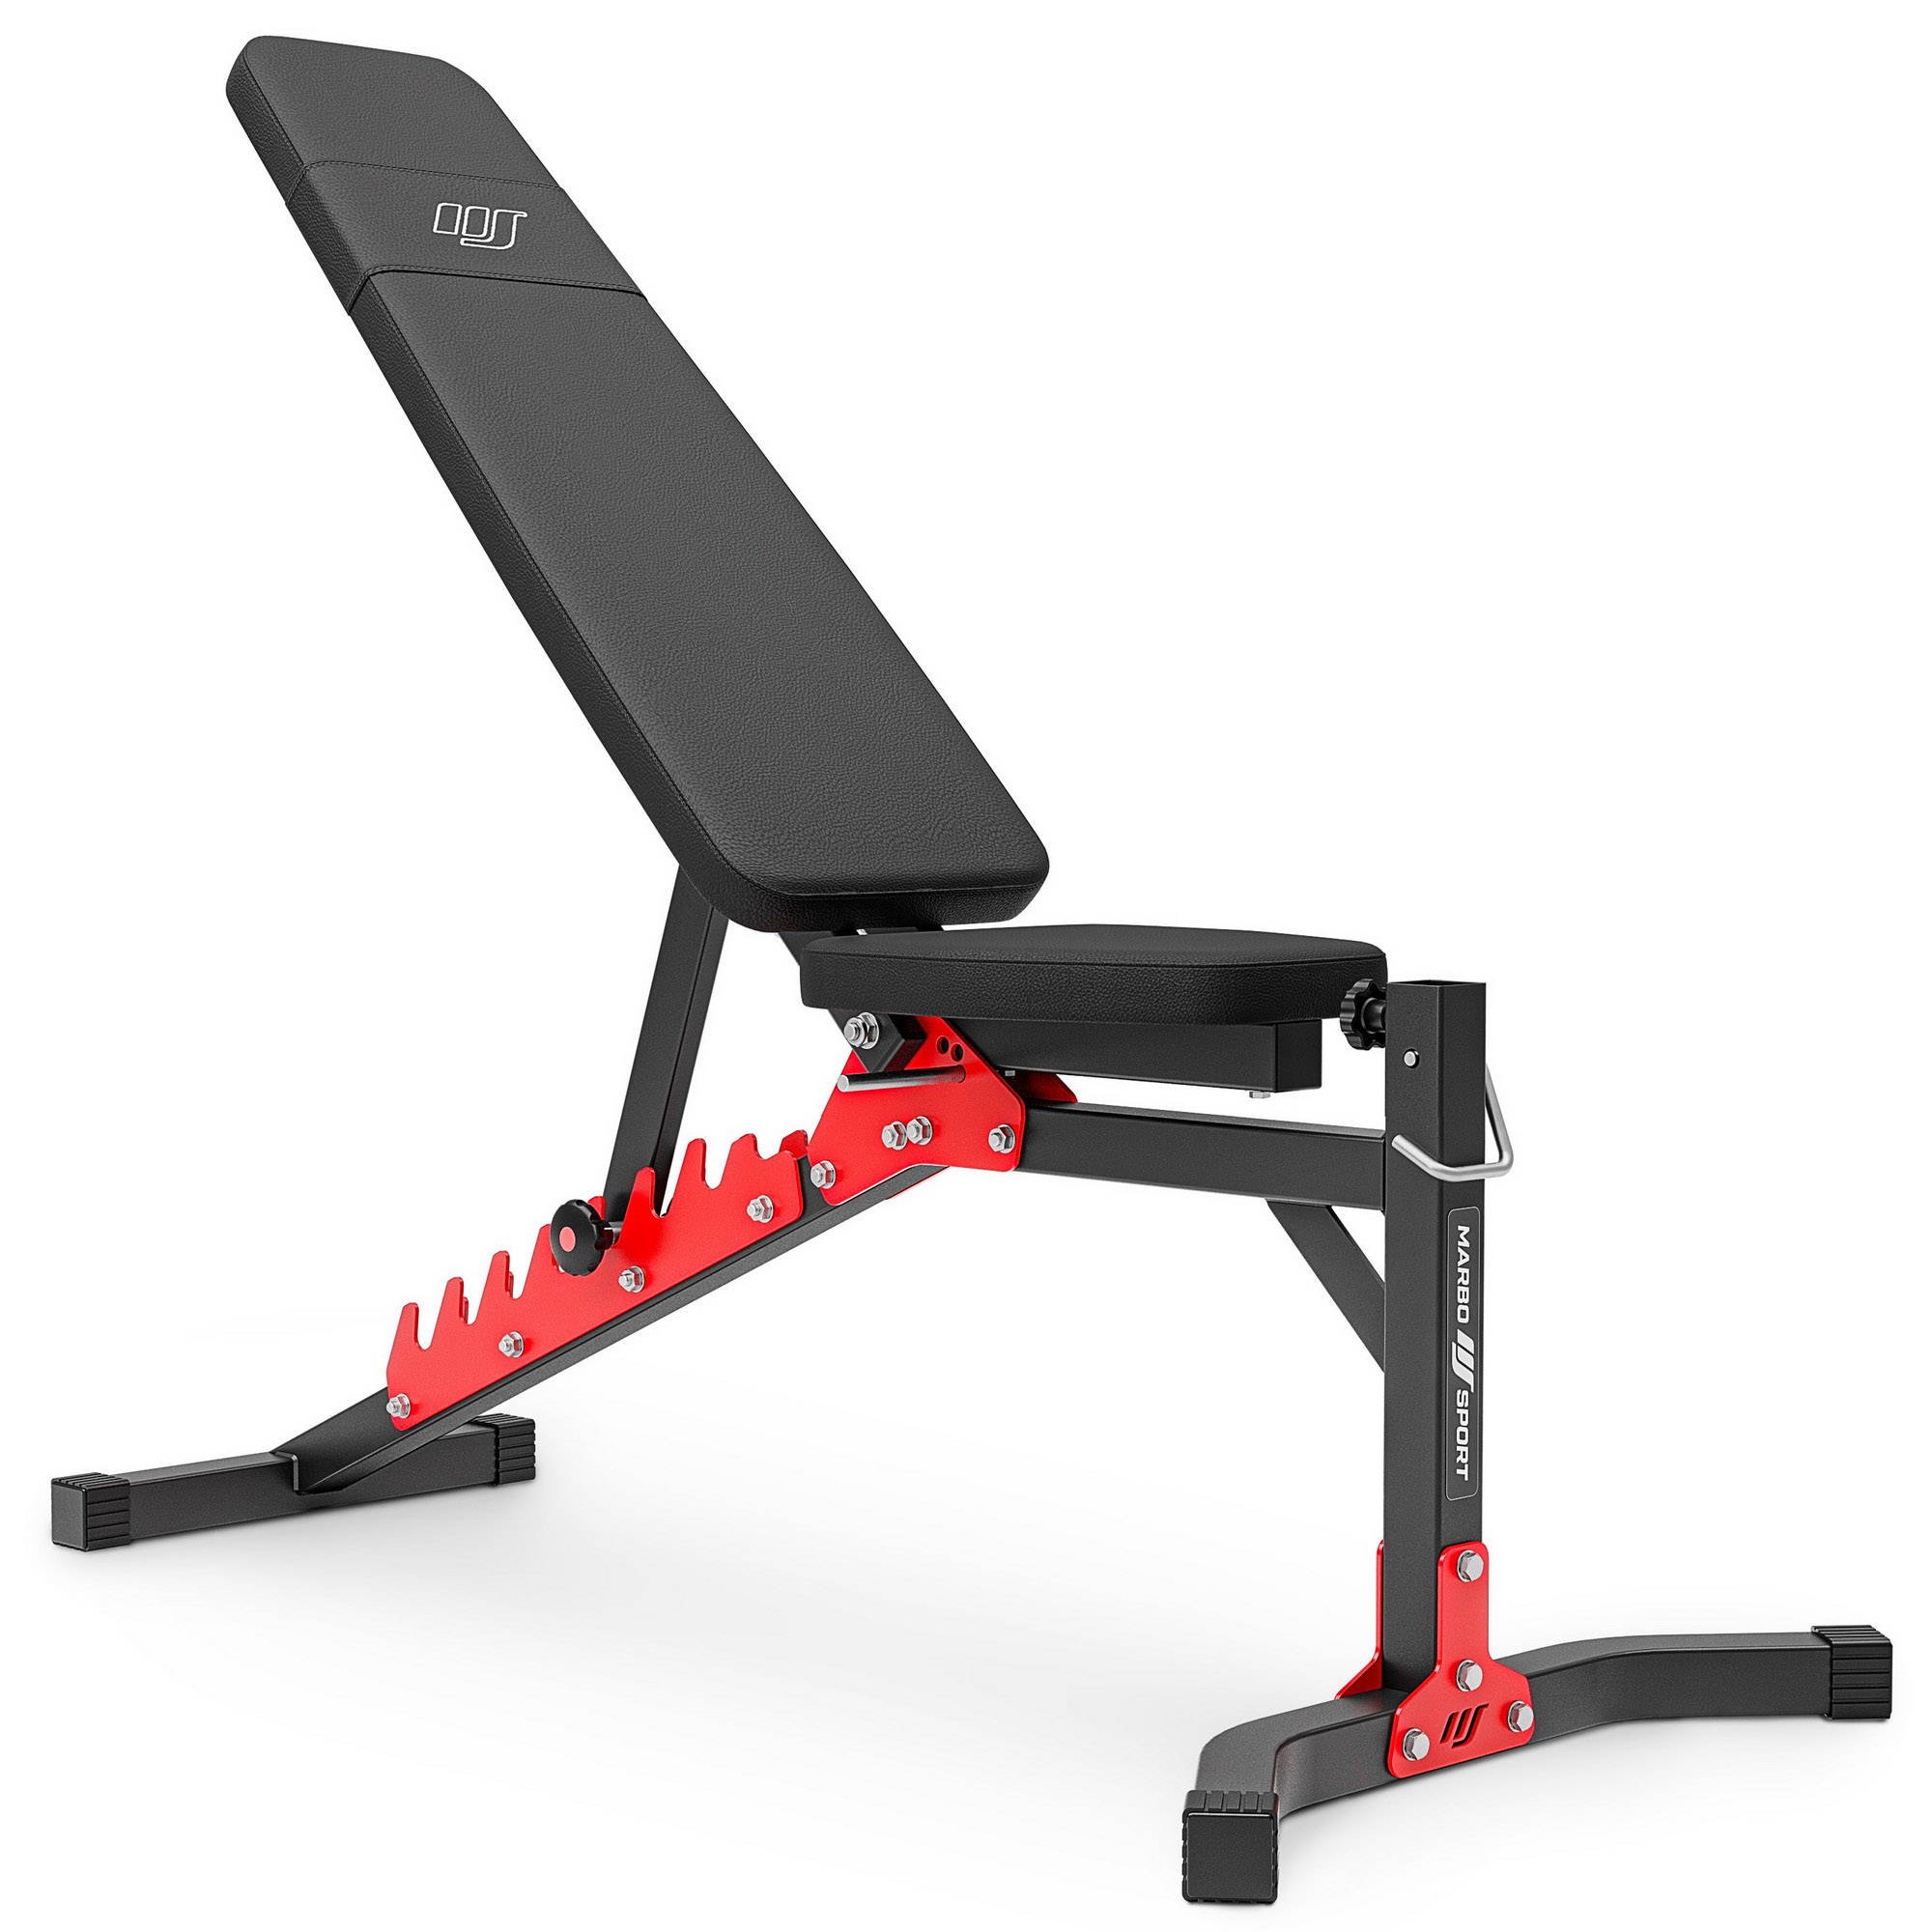 Set MH1 | Weight leg MH-L115 sets Sport Exercise beginners \\ curl Exercise equipment trainer MH-A102 Week + Cyber \\ | For sets + lack - Marbo 2023 Week 2023 Black Strength MH-A101 bench desk